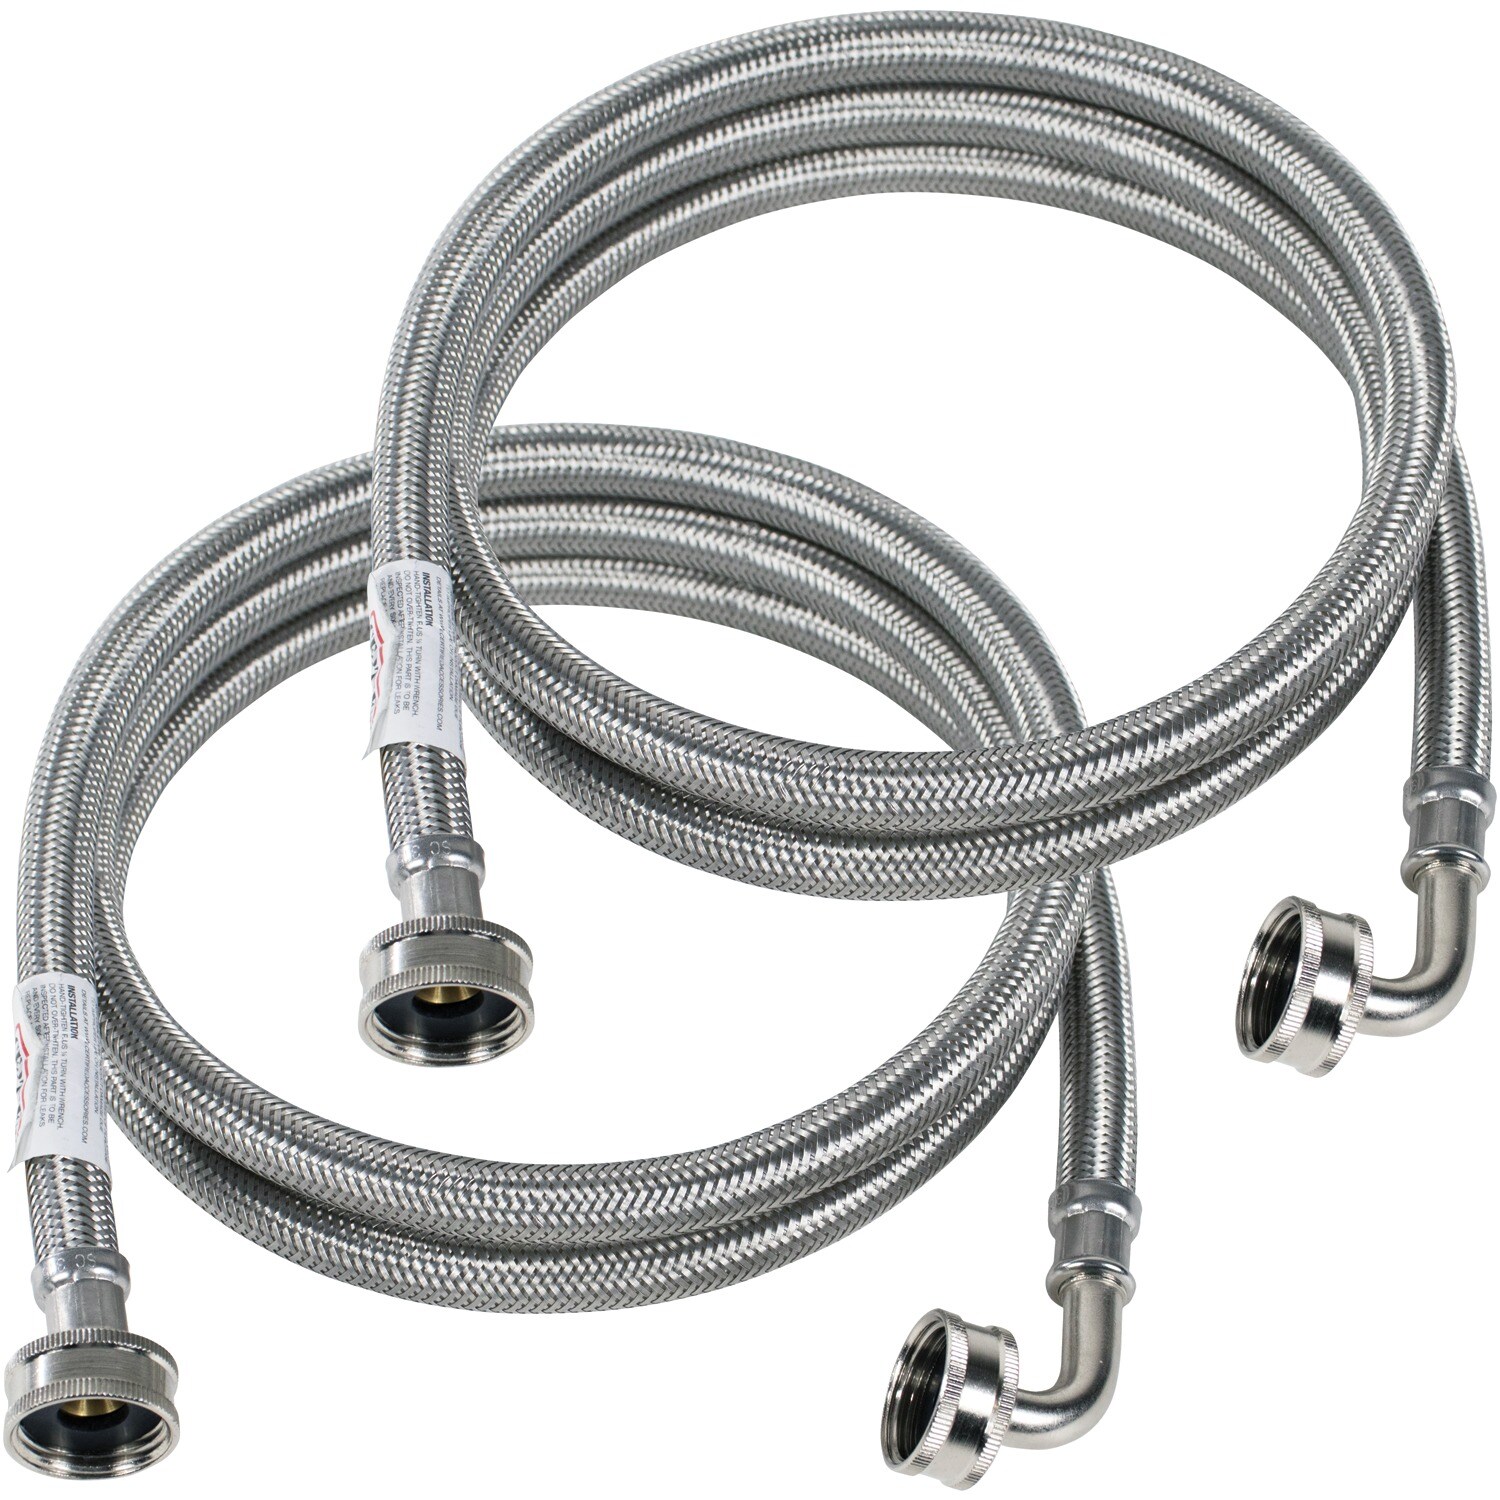 Certified Appliance Accessories Ice Maker Water Line, 10 Feet, Stainless  Steel & Dishwasher Hose with 90 Degree FGH Elbow, Water Supply Line, 6  Feet